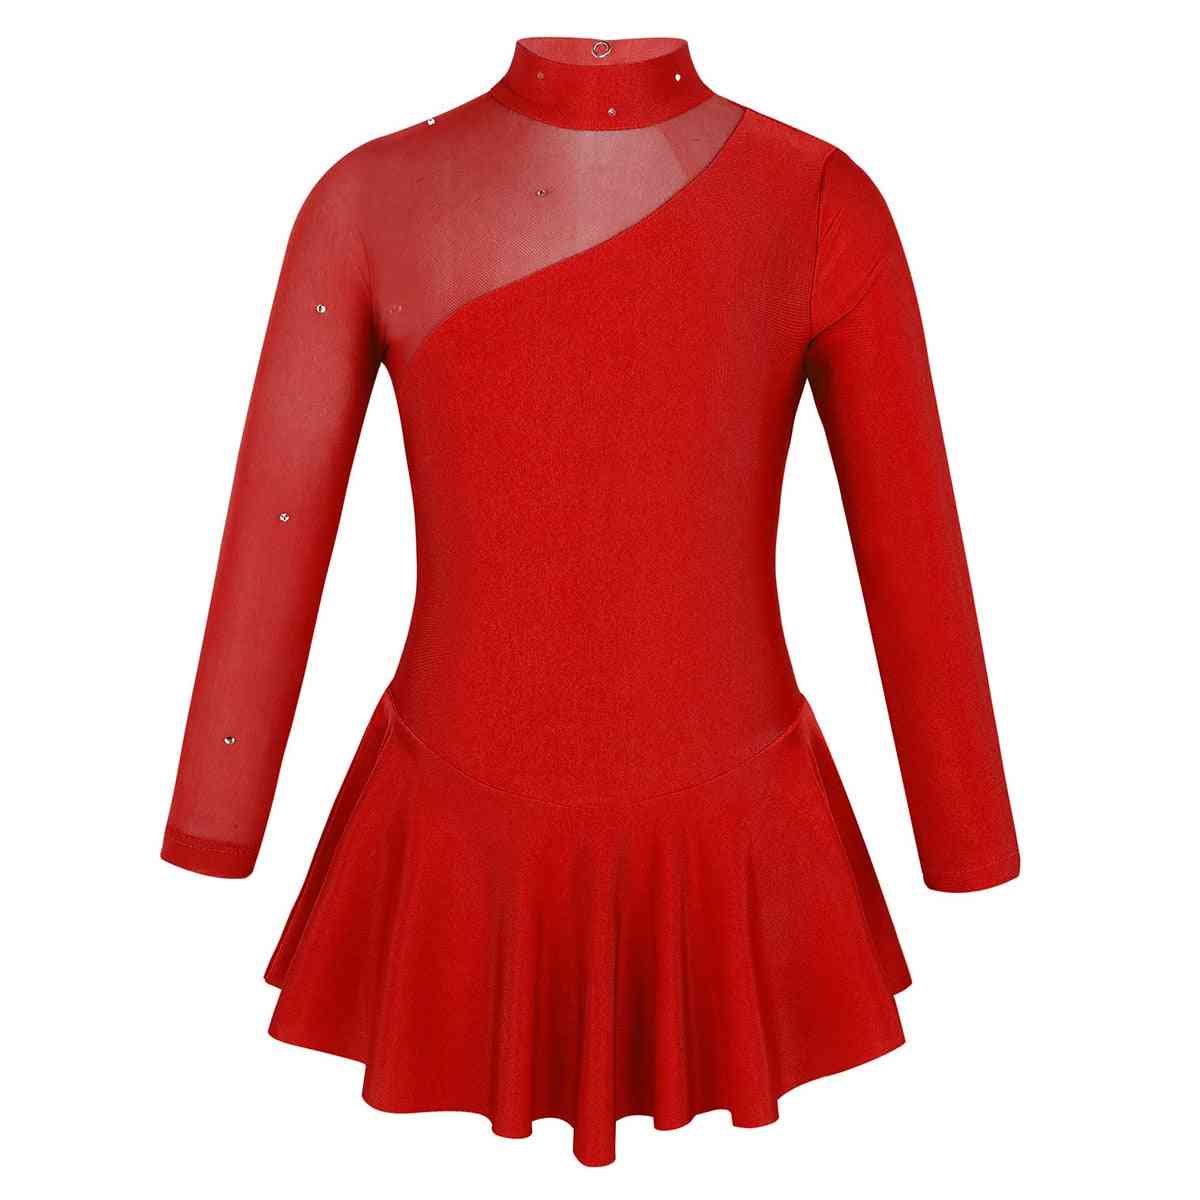 Girls Figure Ice Skating Competition Dress, Long Sleeves Tulle Splice Cutouts